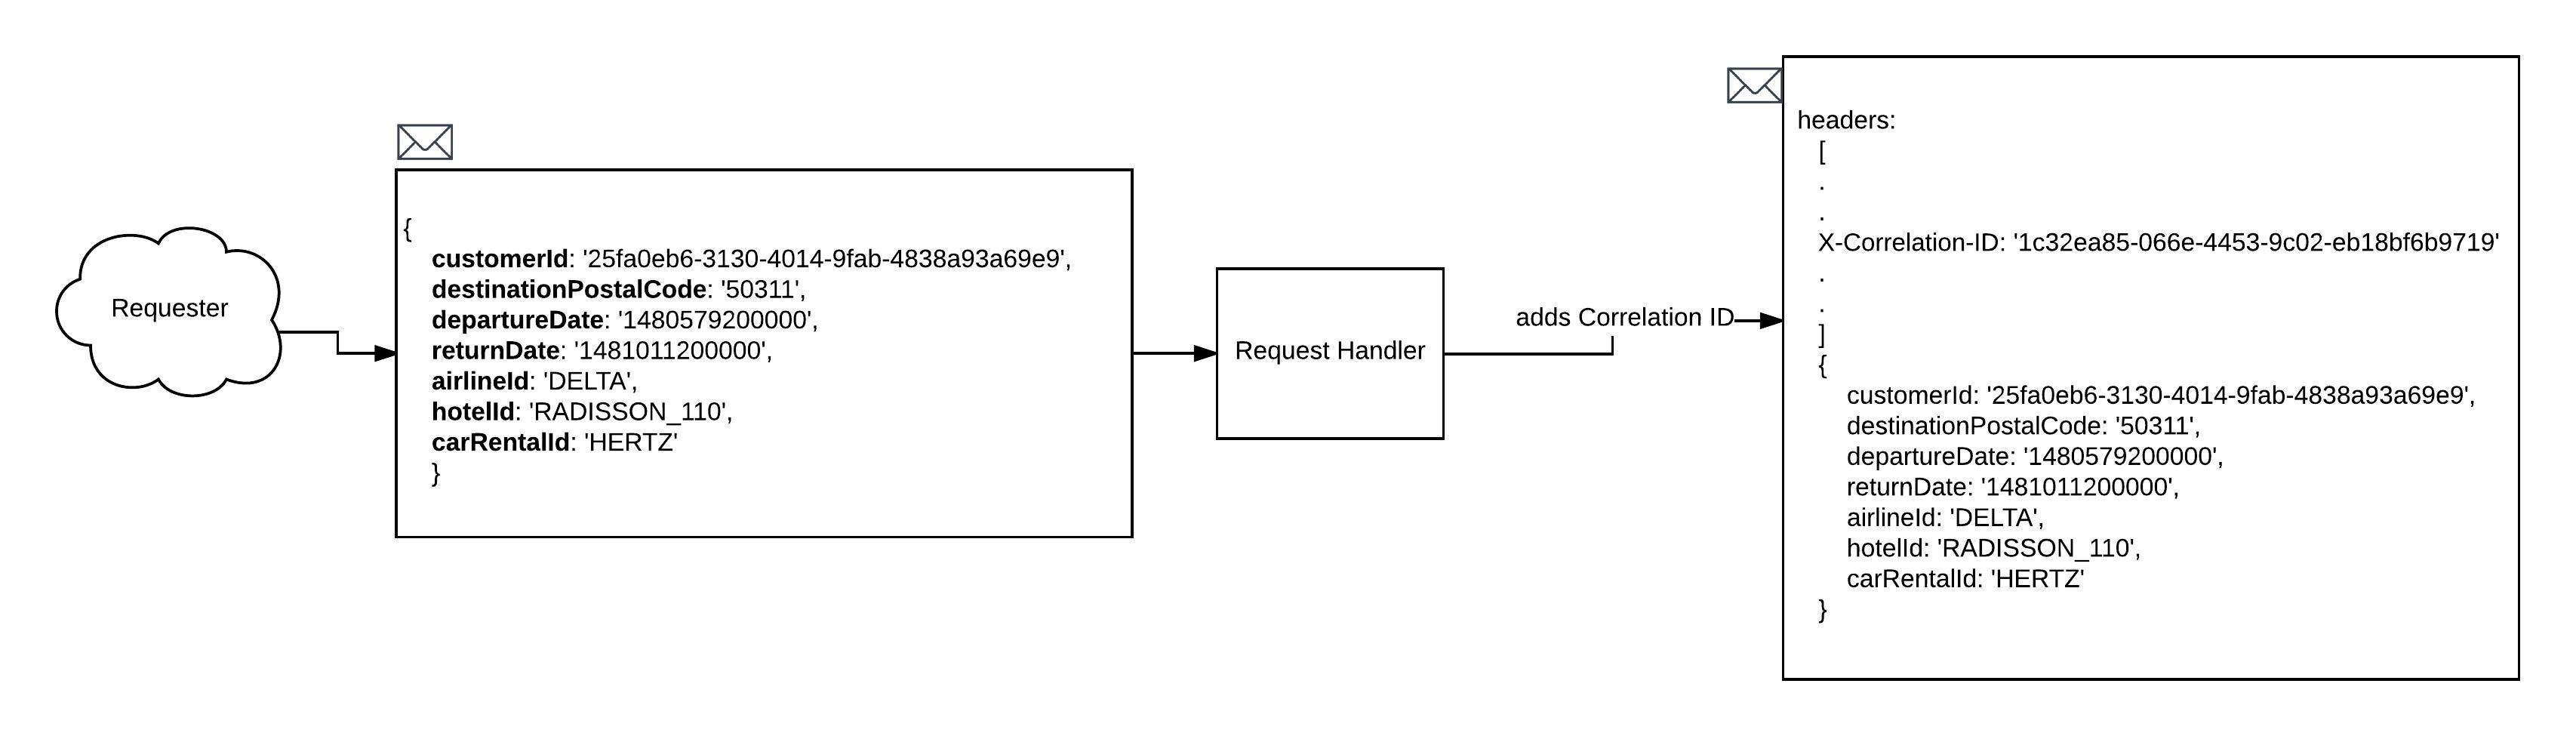 Figure 2: Create and assign a CorrelationID to the message header before it is needed for use in the distributed system.